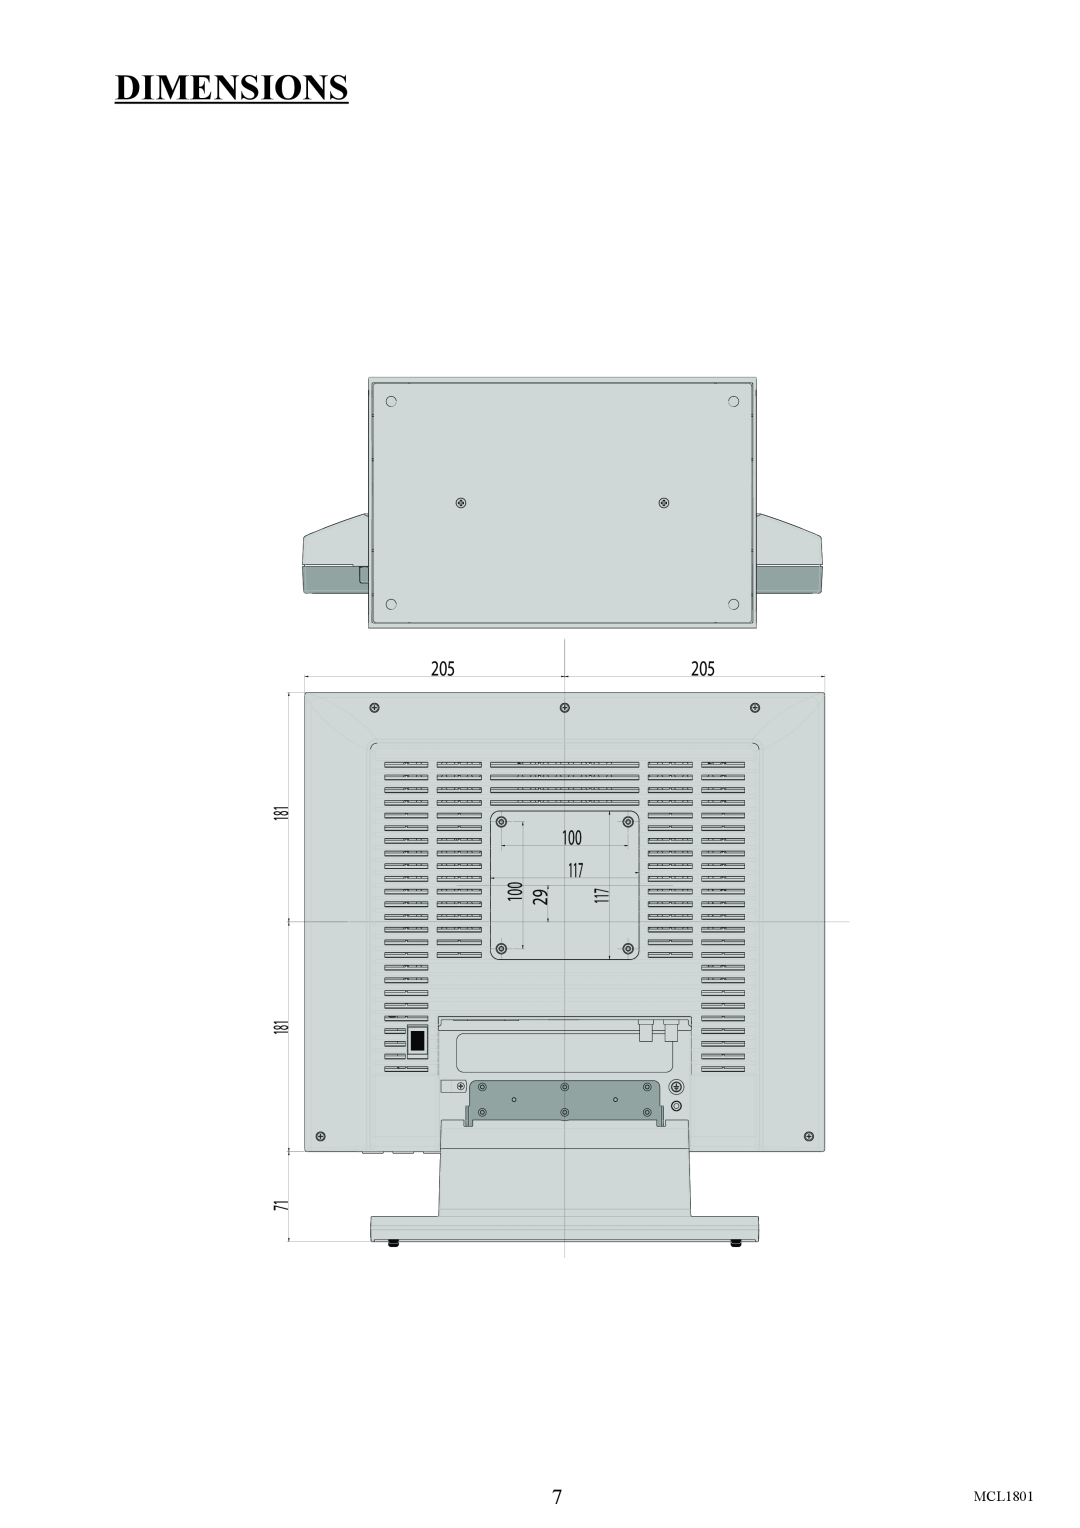 Philips MCL1801 user manual Dimensions 